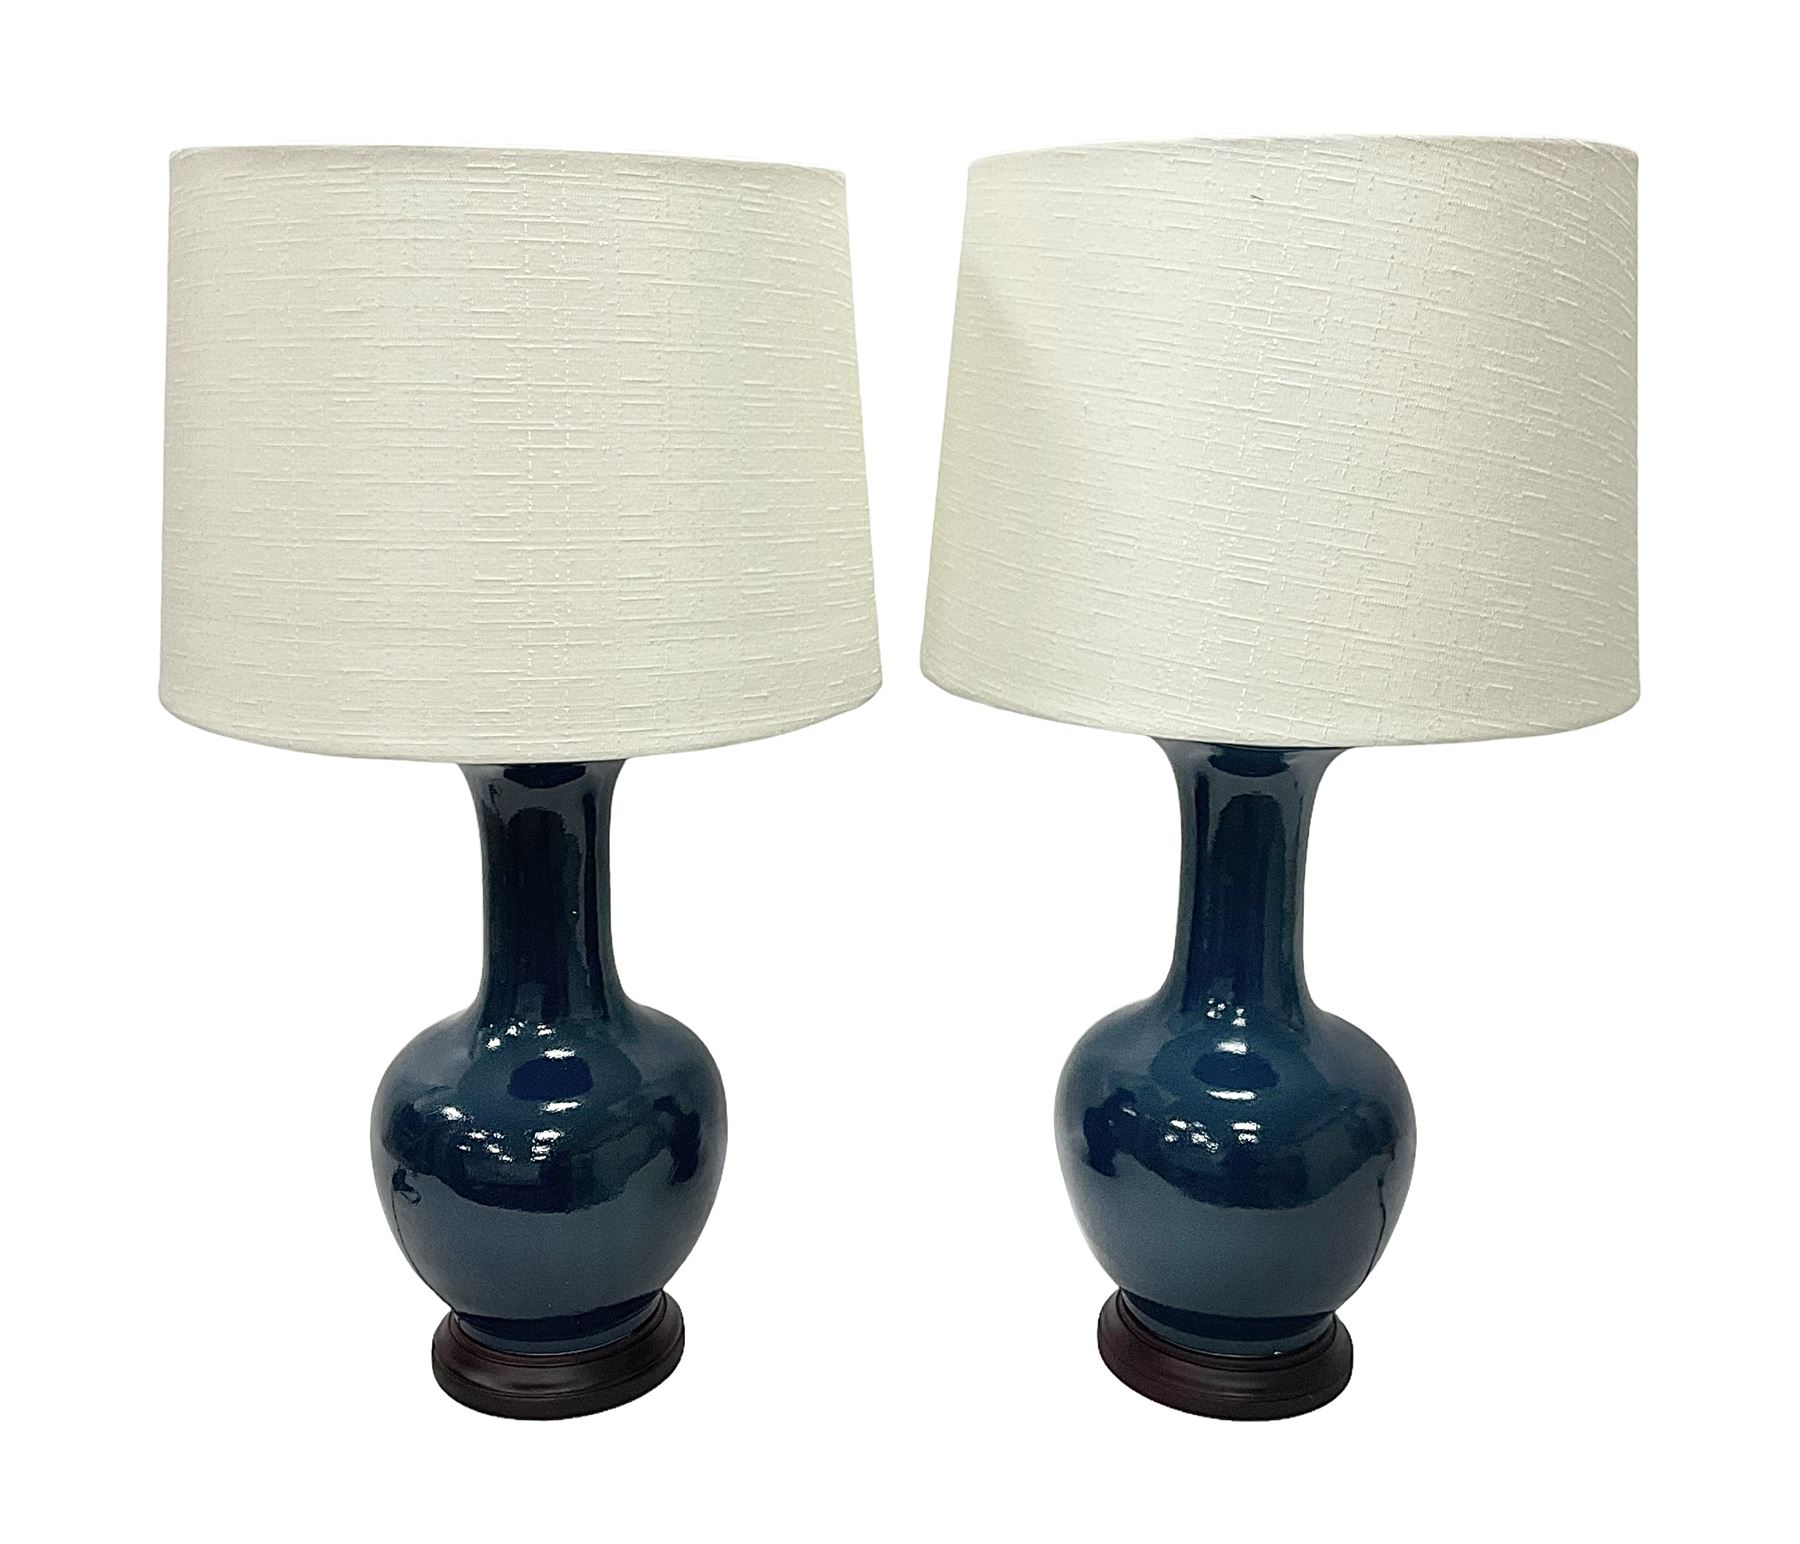 Pair of Chinese teal glazed table lamps